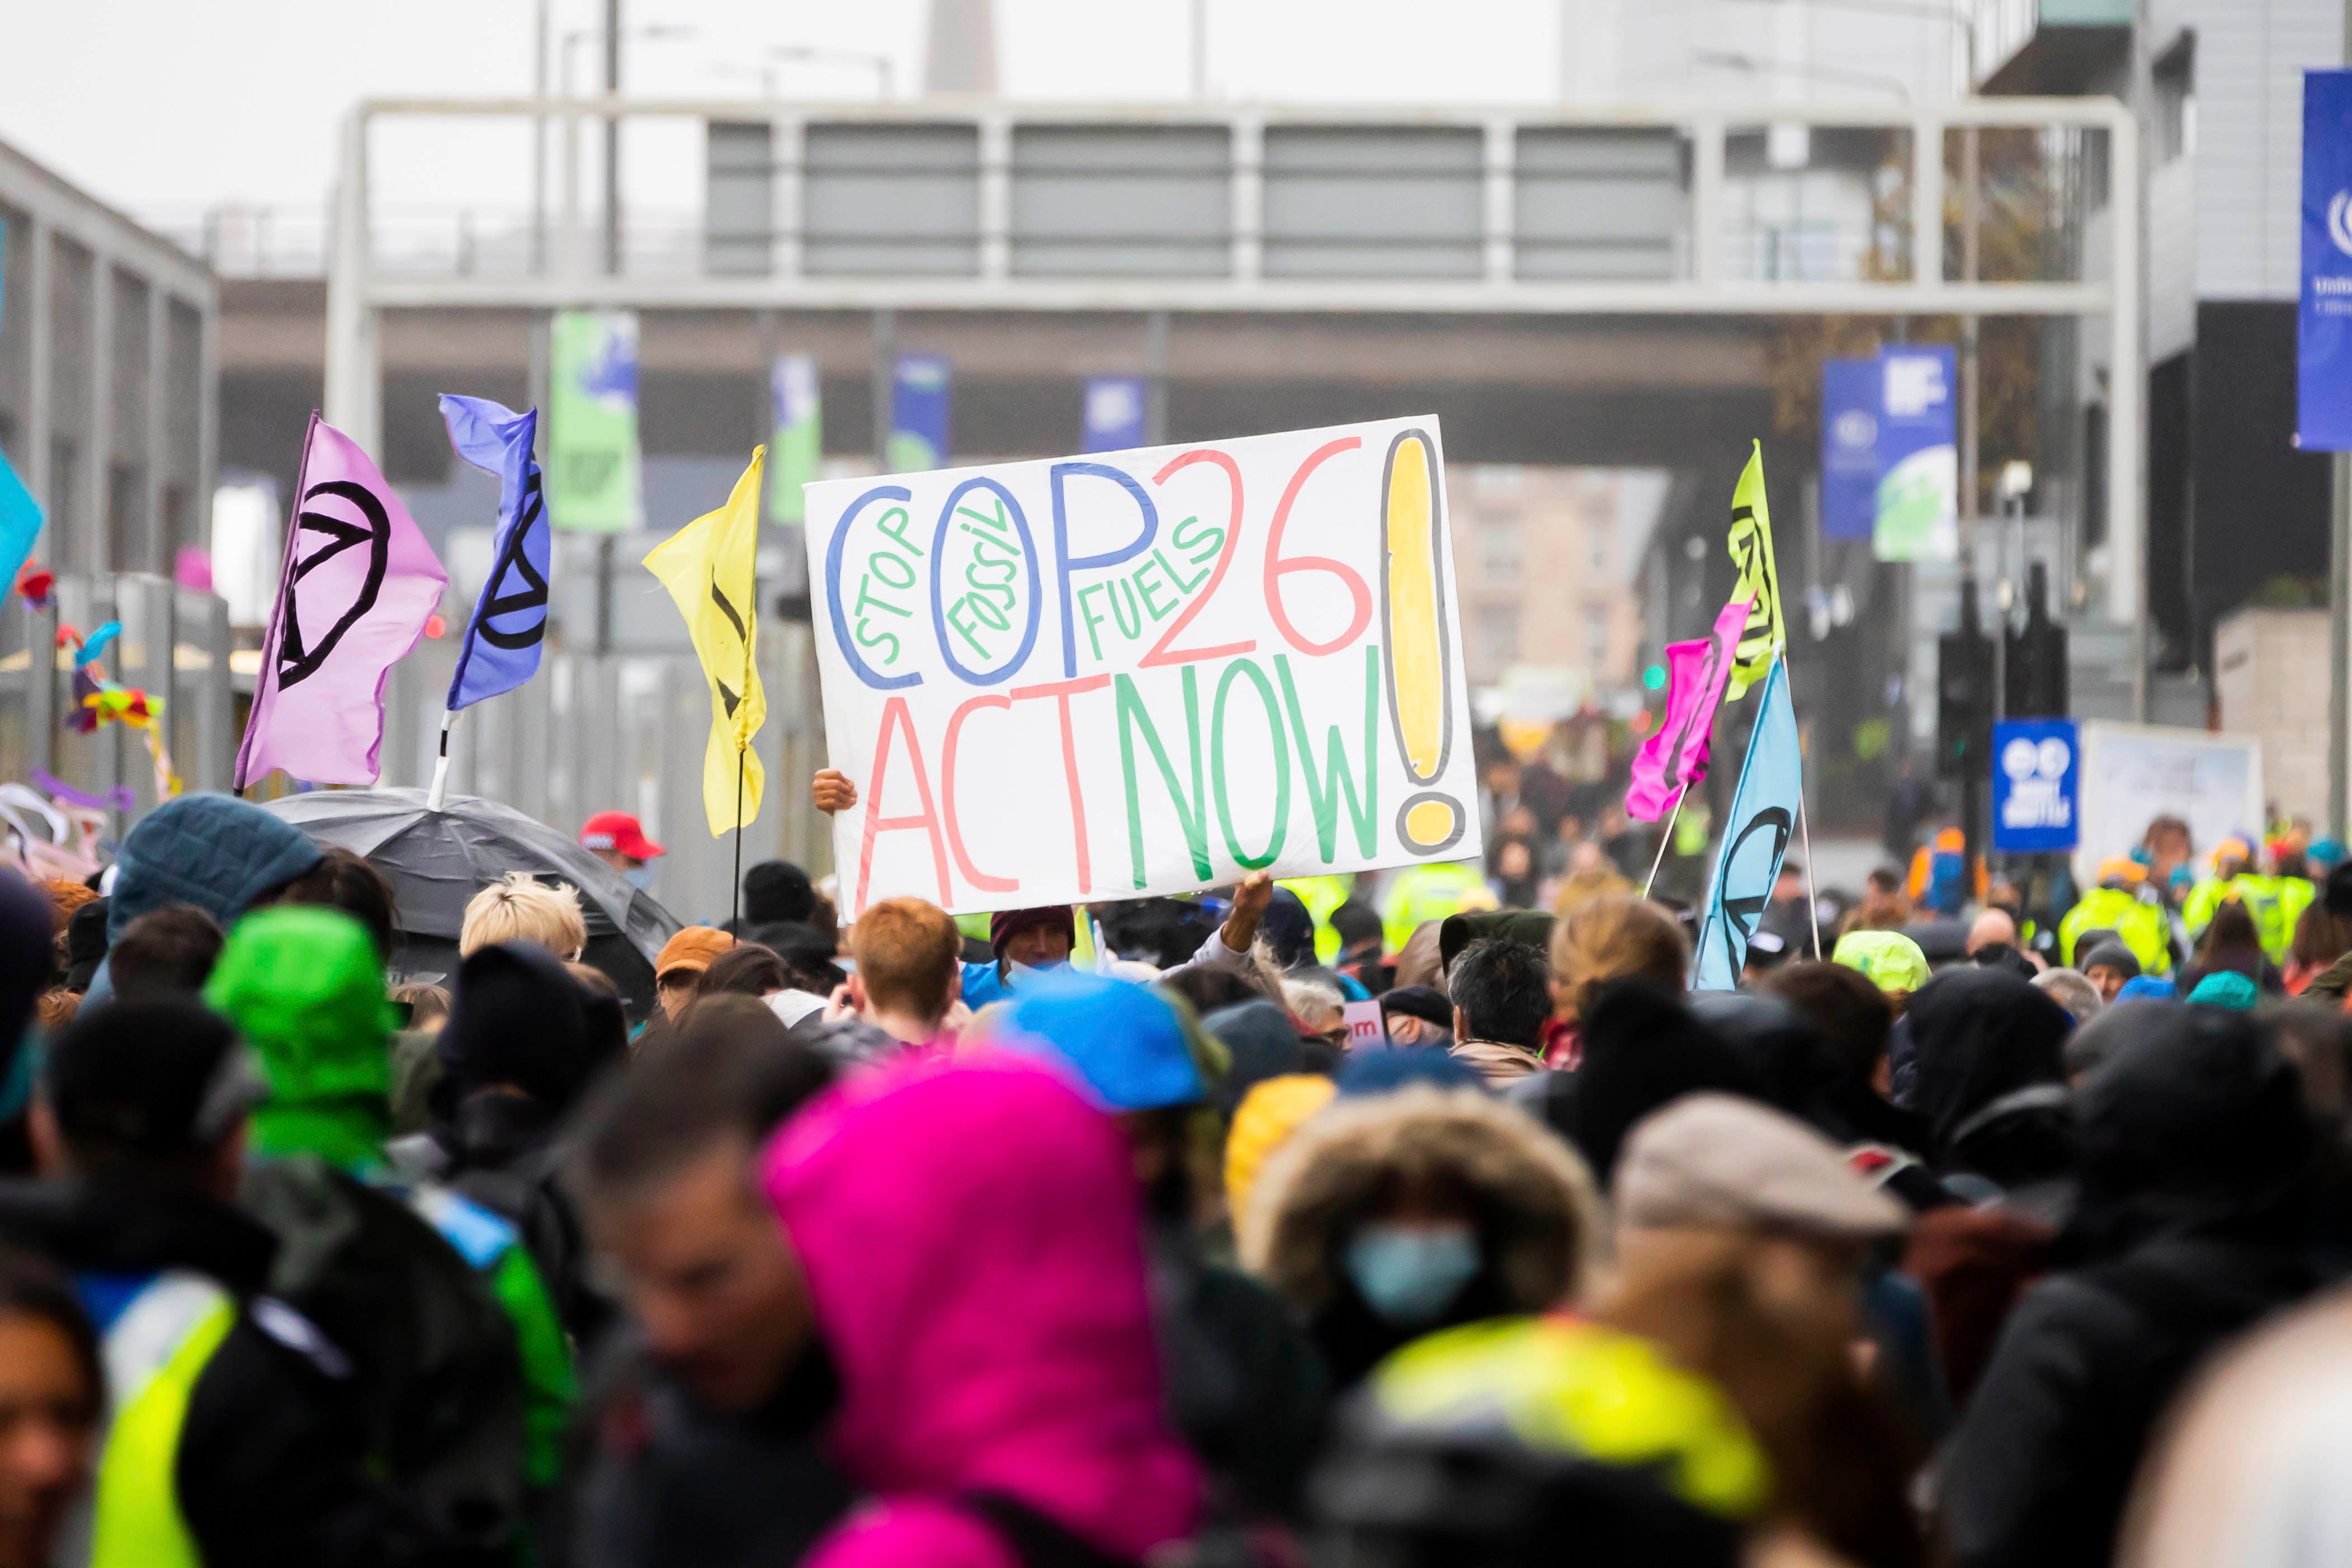 COP26 Is Over – What’s Next for Forests, Coal, and Fossil Fuel Finance?